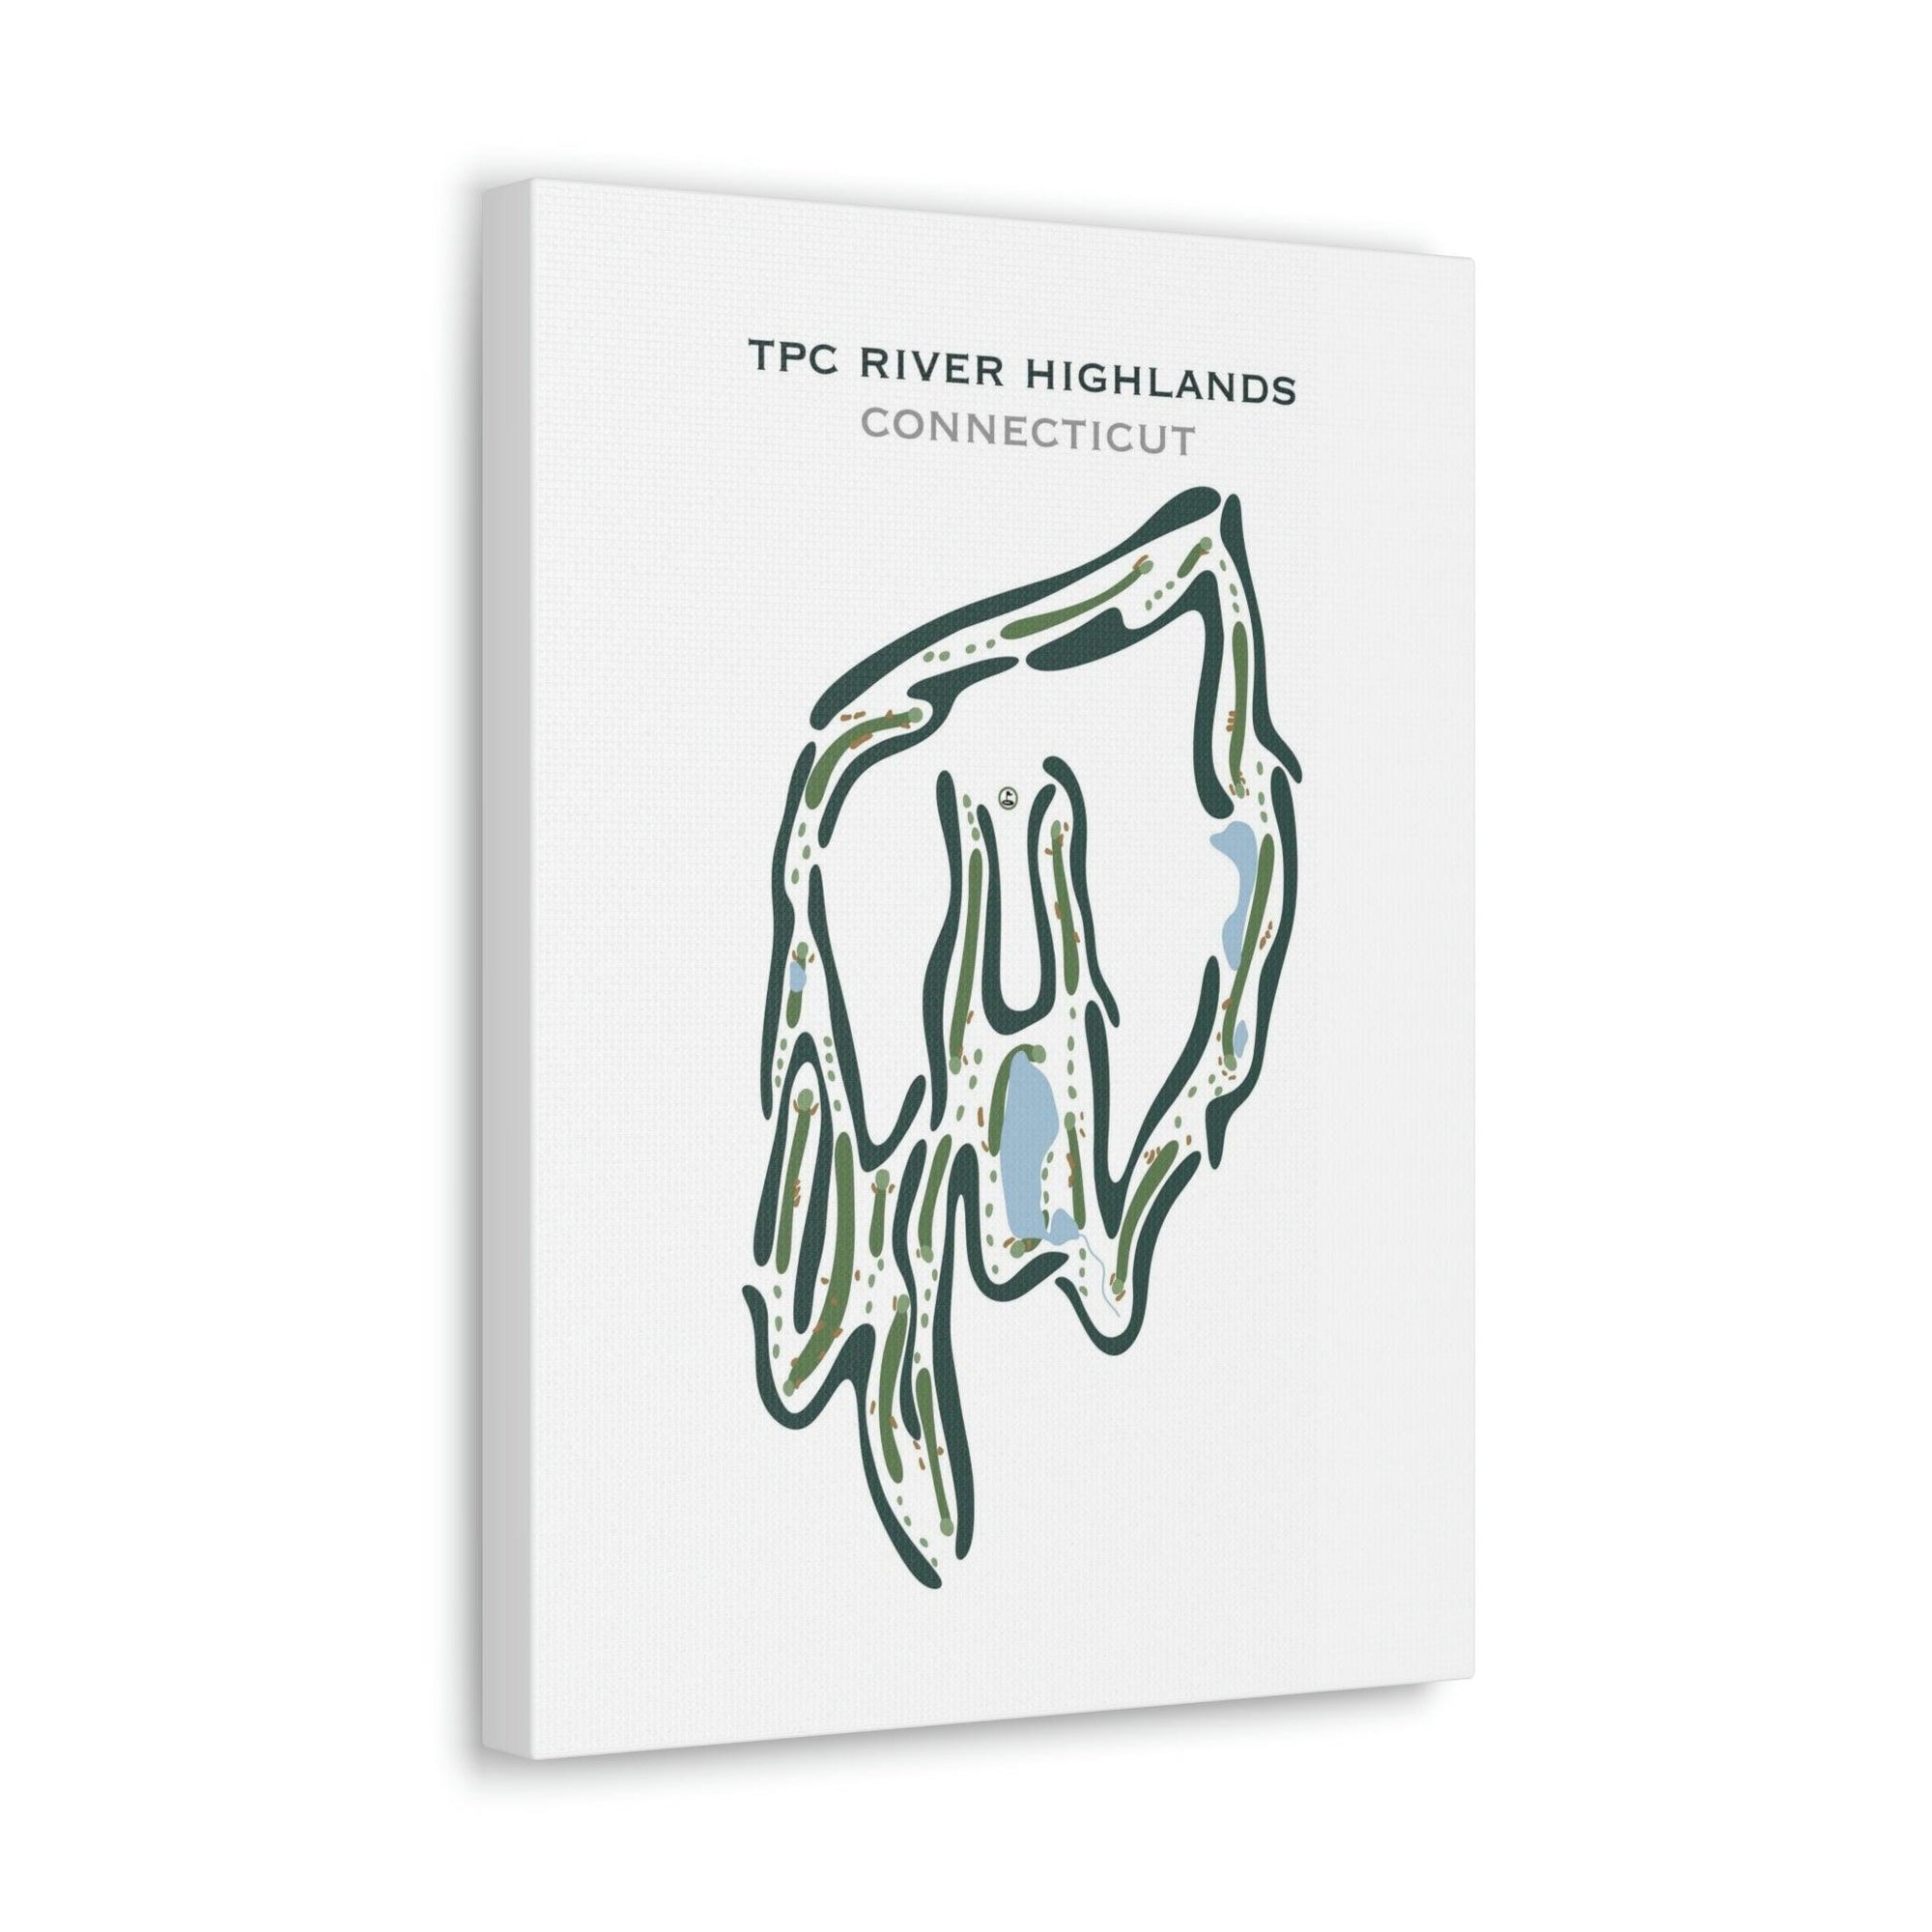 TPC River Highlands, Connecticut - Printed Golf Courses